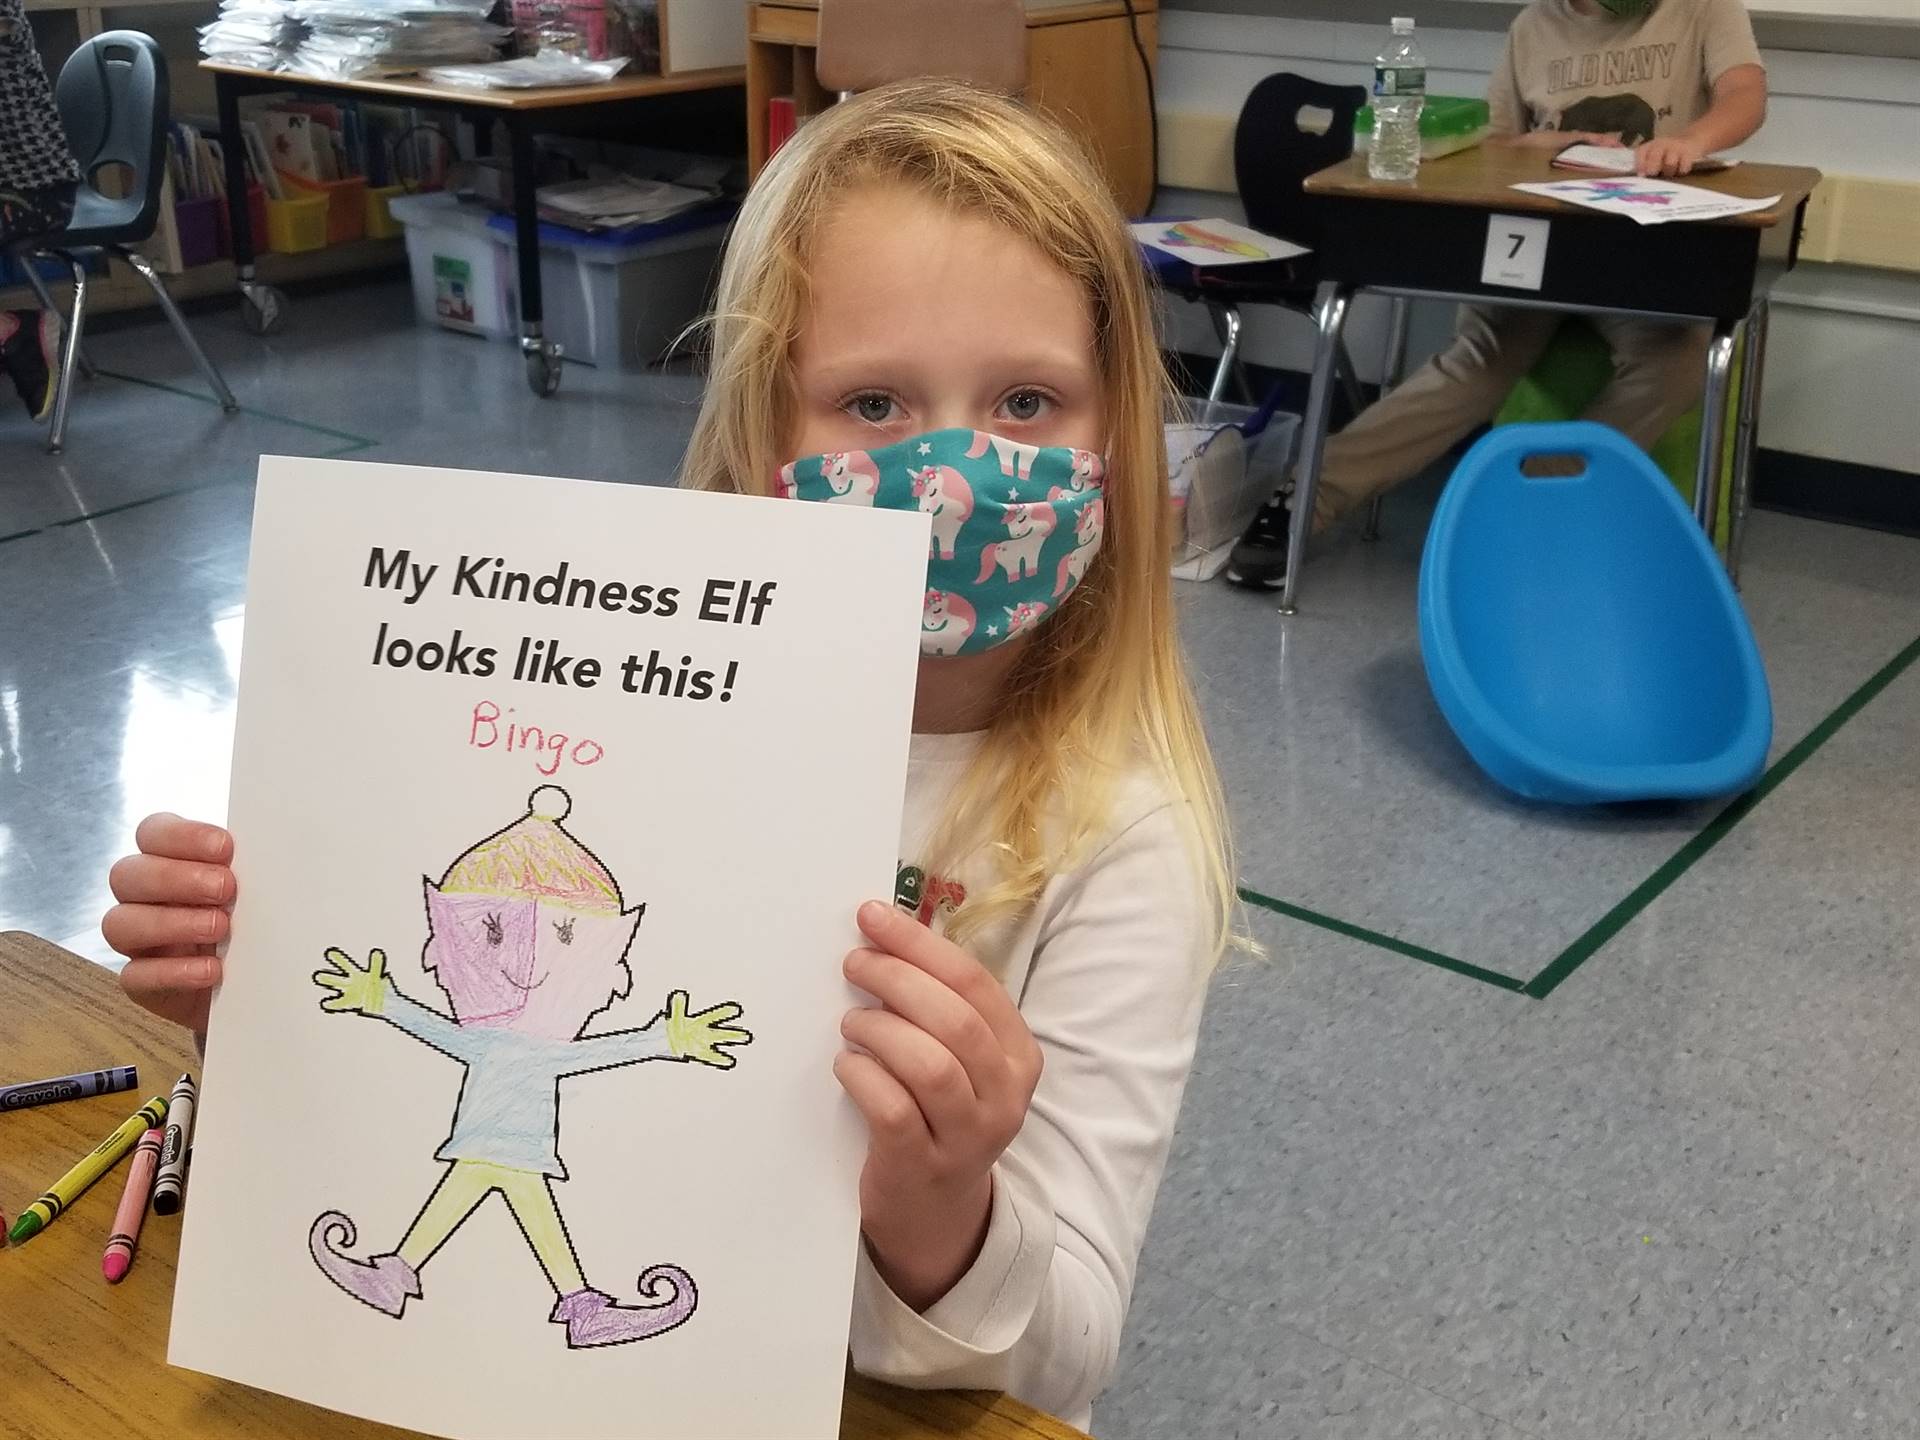 students shows a picture of the kindness elf